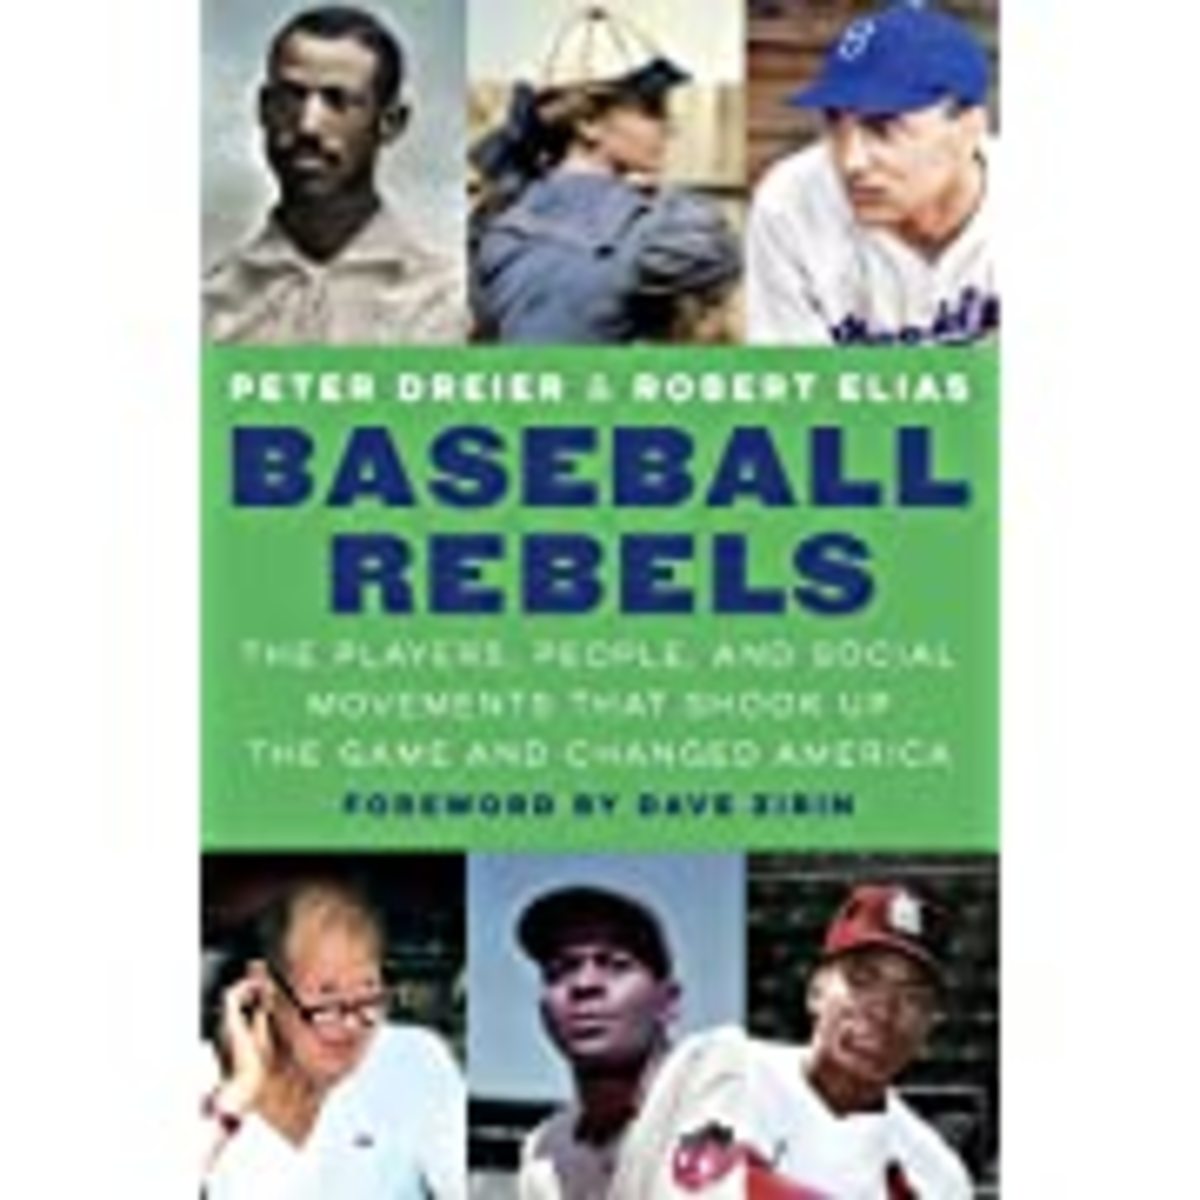 Baseball Rebels: the Players, People, and Social Movements That Shook Up the Game and Changed America.